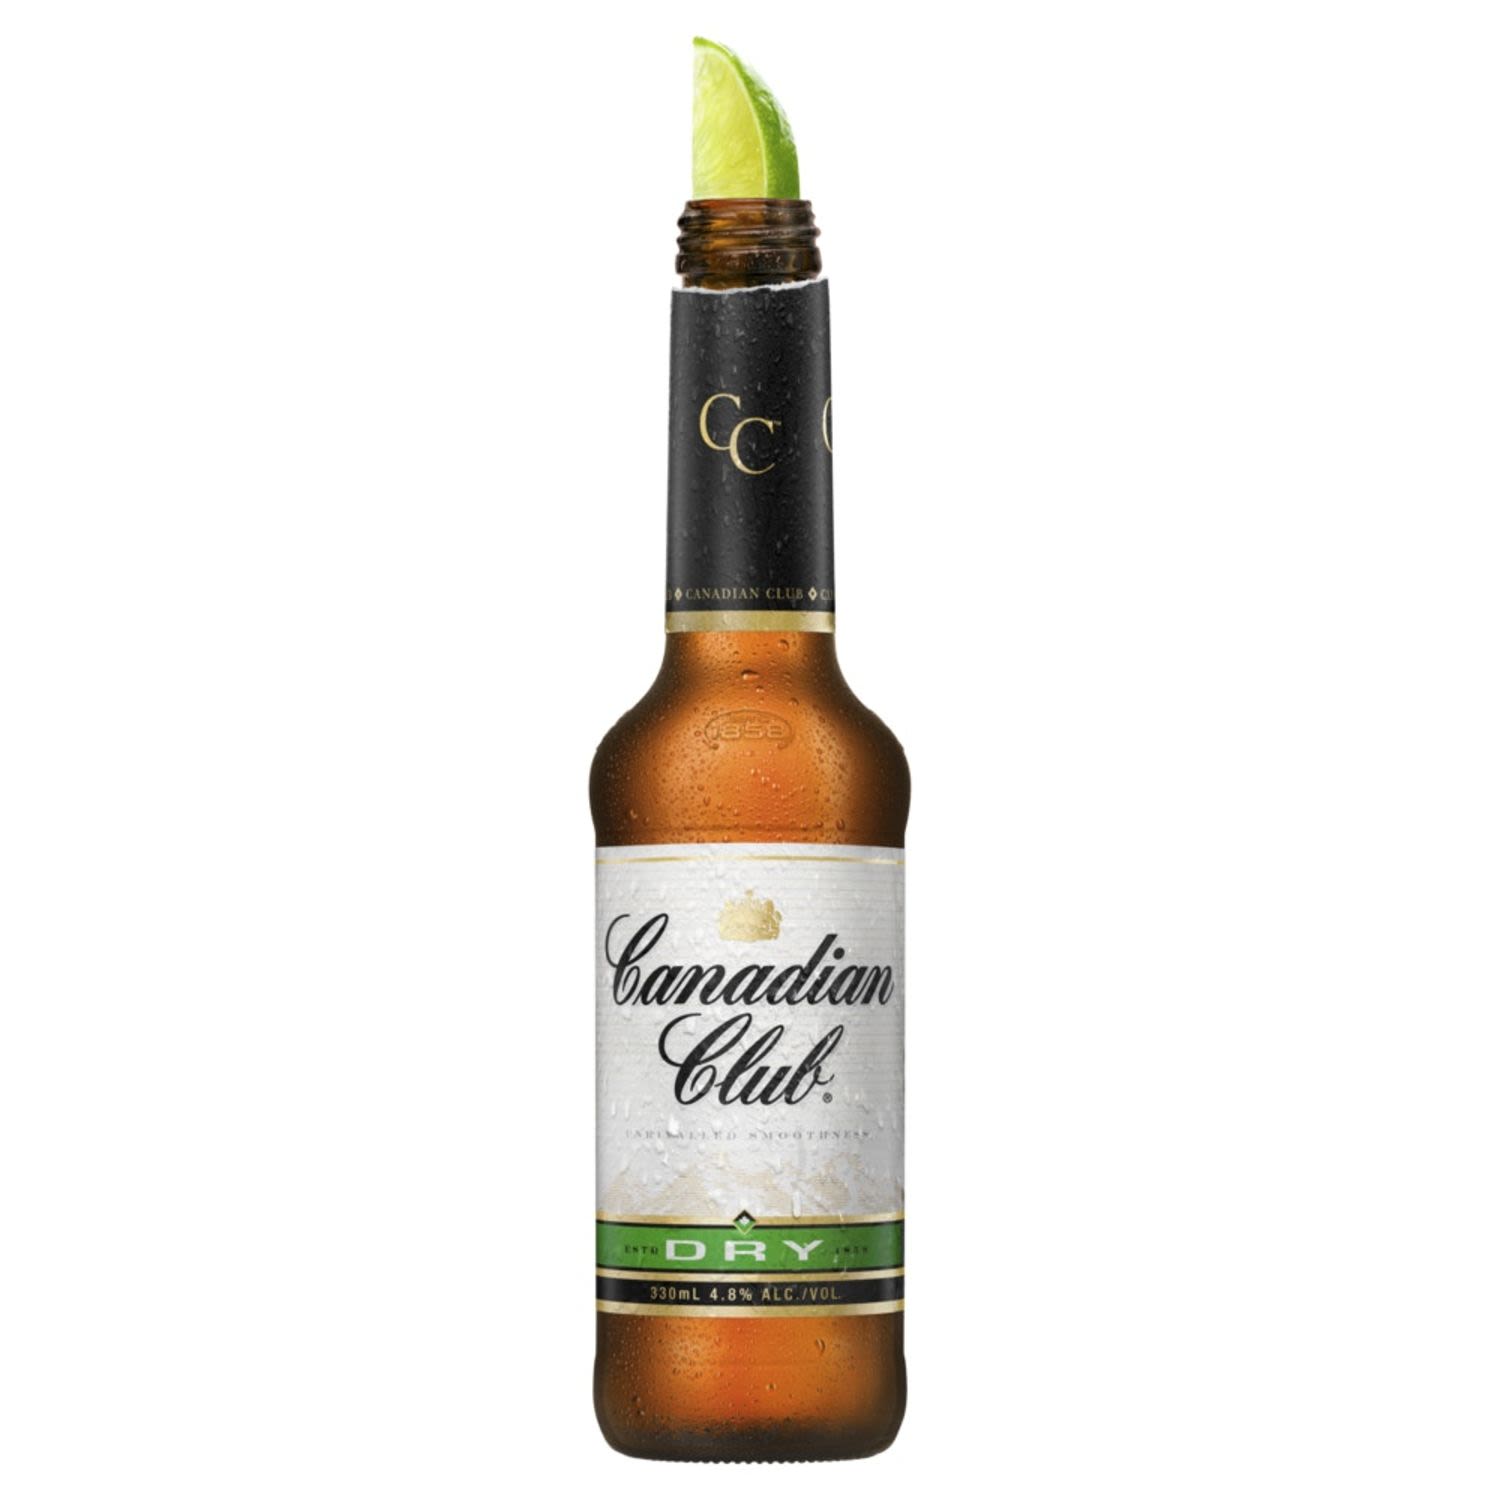 Canadian Club Whisky RTD comes as a blend of six-year-old Canadian Club and Dry Ginger Ale. Enjoy chilled or poured over ice for the ultimate refreshment.<br /> <br />Alcohol Volume: 4.80%<br /><br />Pack Format: Bottle<br /><br />Standard Drinks: 1.3</br /><br />Pack Type: Bottle<br />